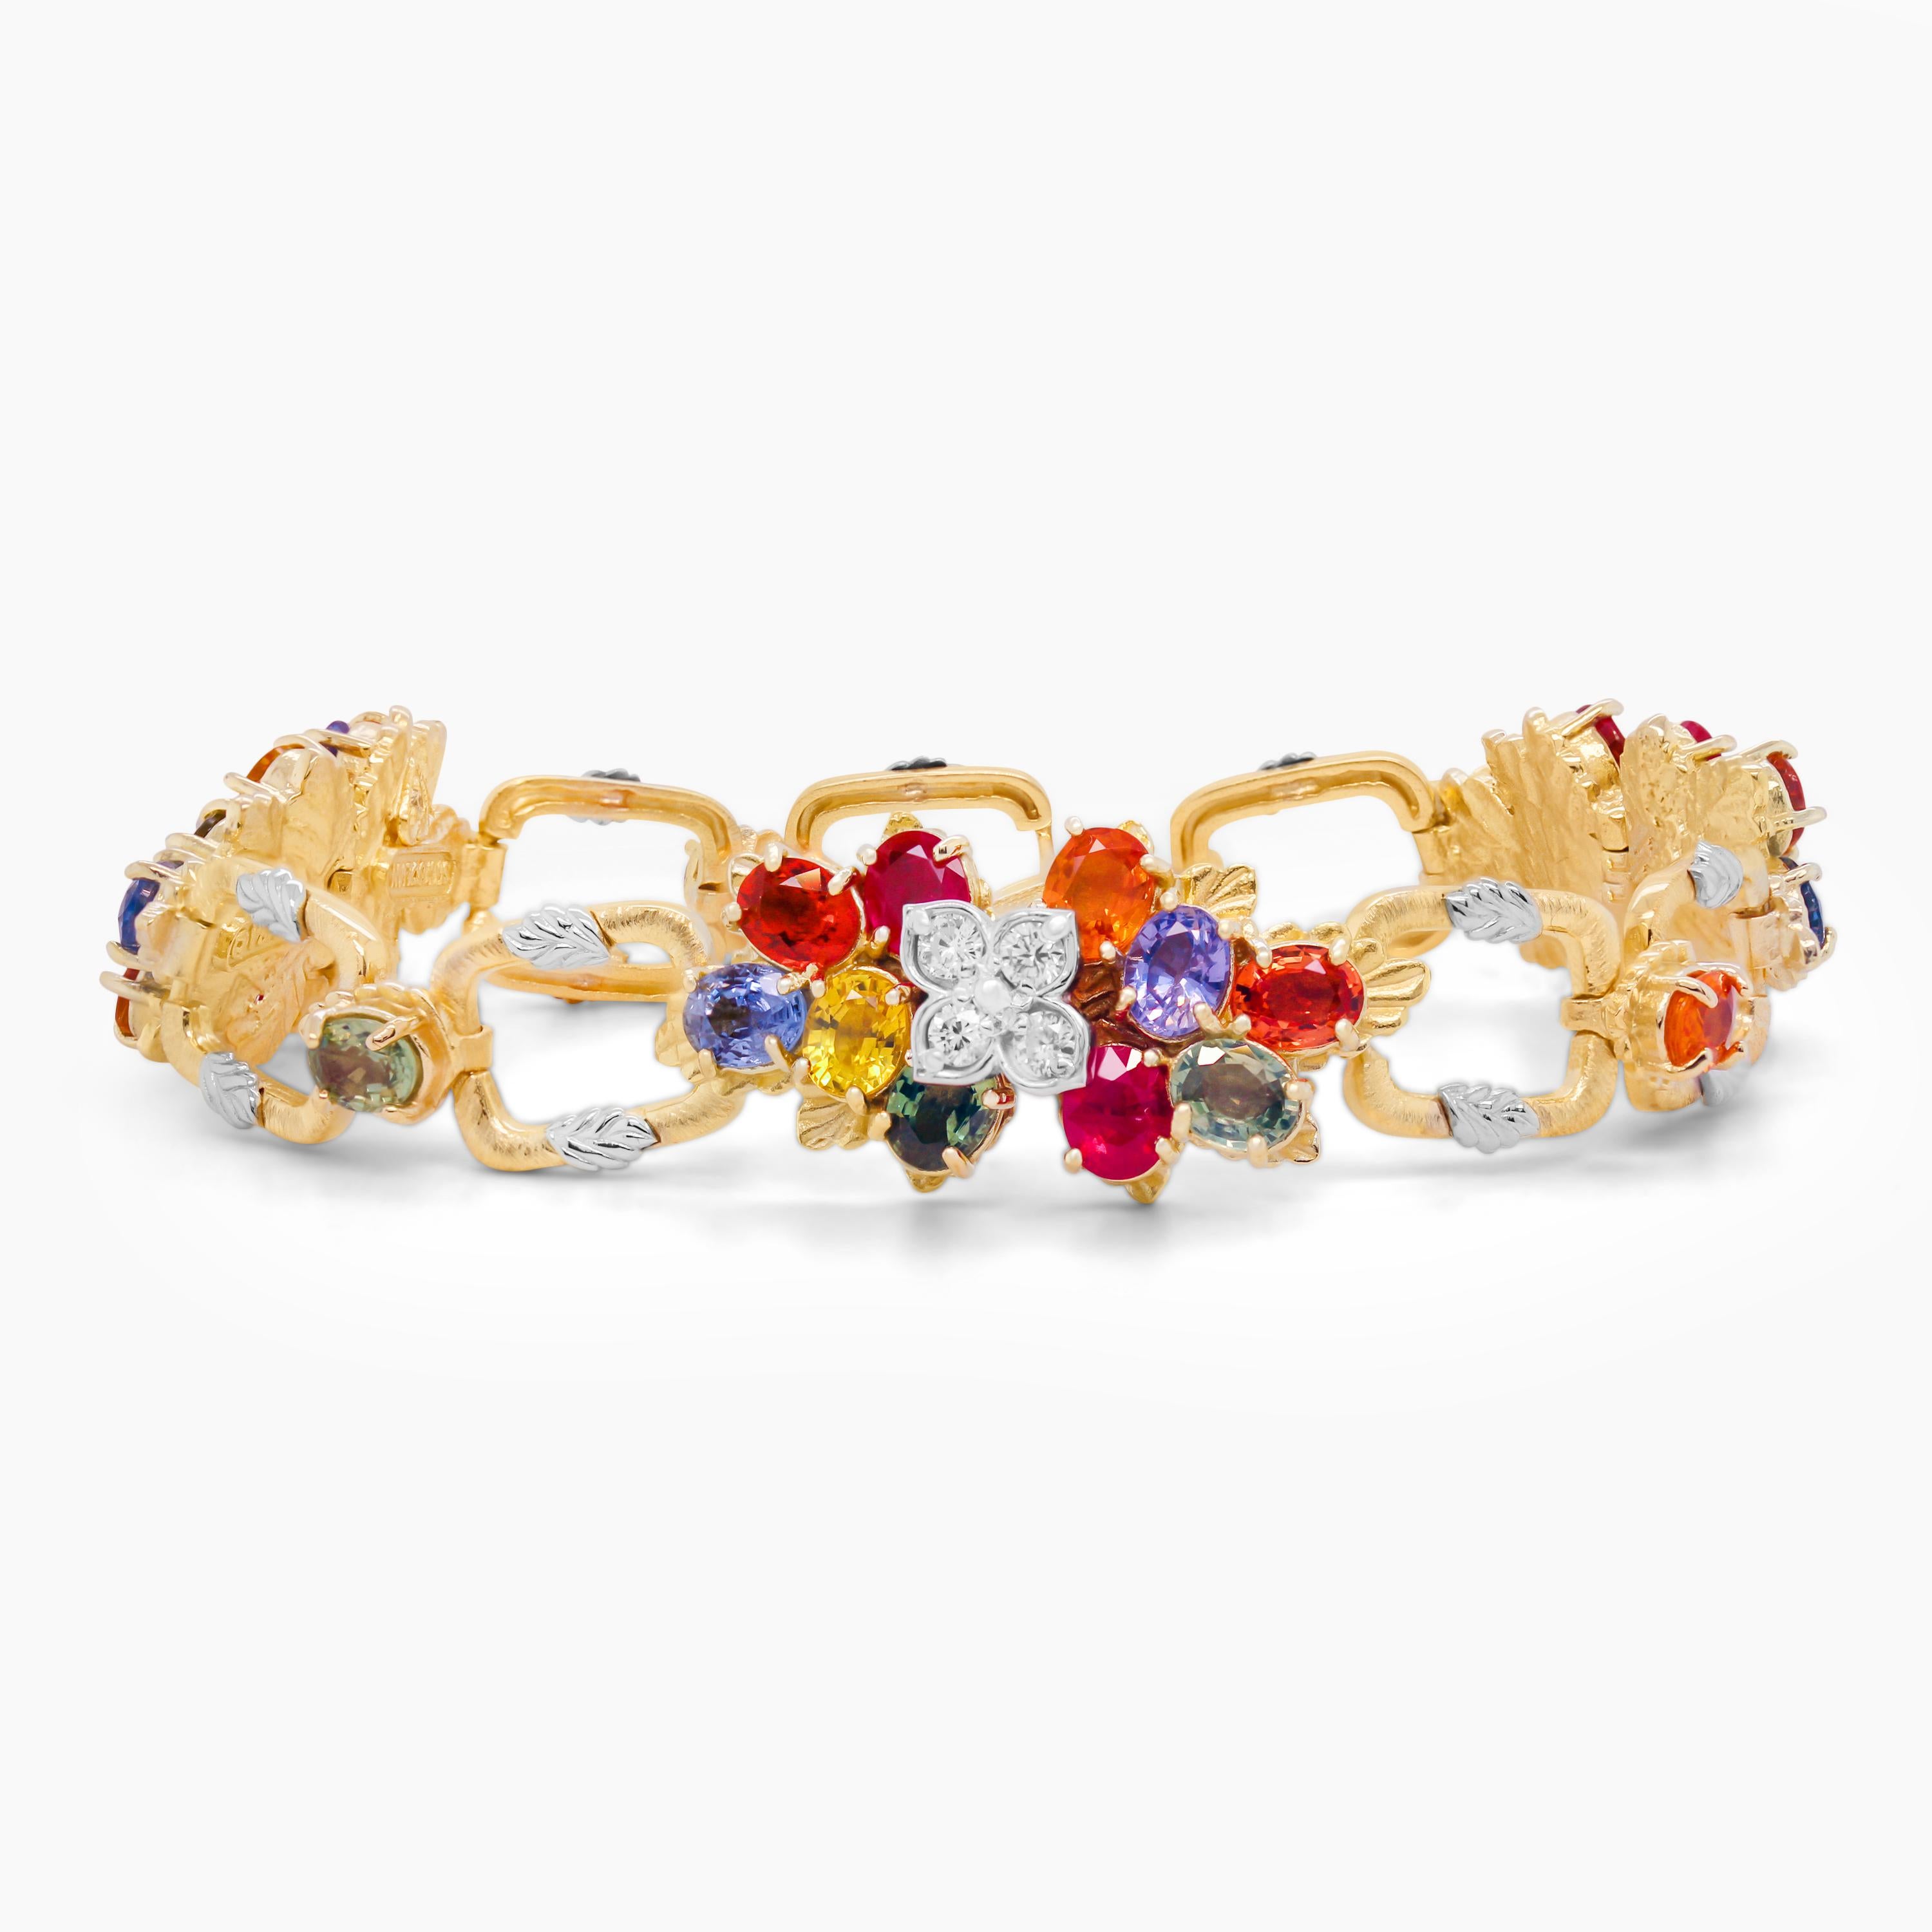 Stambolian 18K Yellow White Gold Multi Color Sapphire Ruby Floral Link Bracelet

This one-of-a-kind bracelet features yellow gold links with white gold leaves on each square. Three sections of multi-color sapphires make up this bracelet with diamond